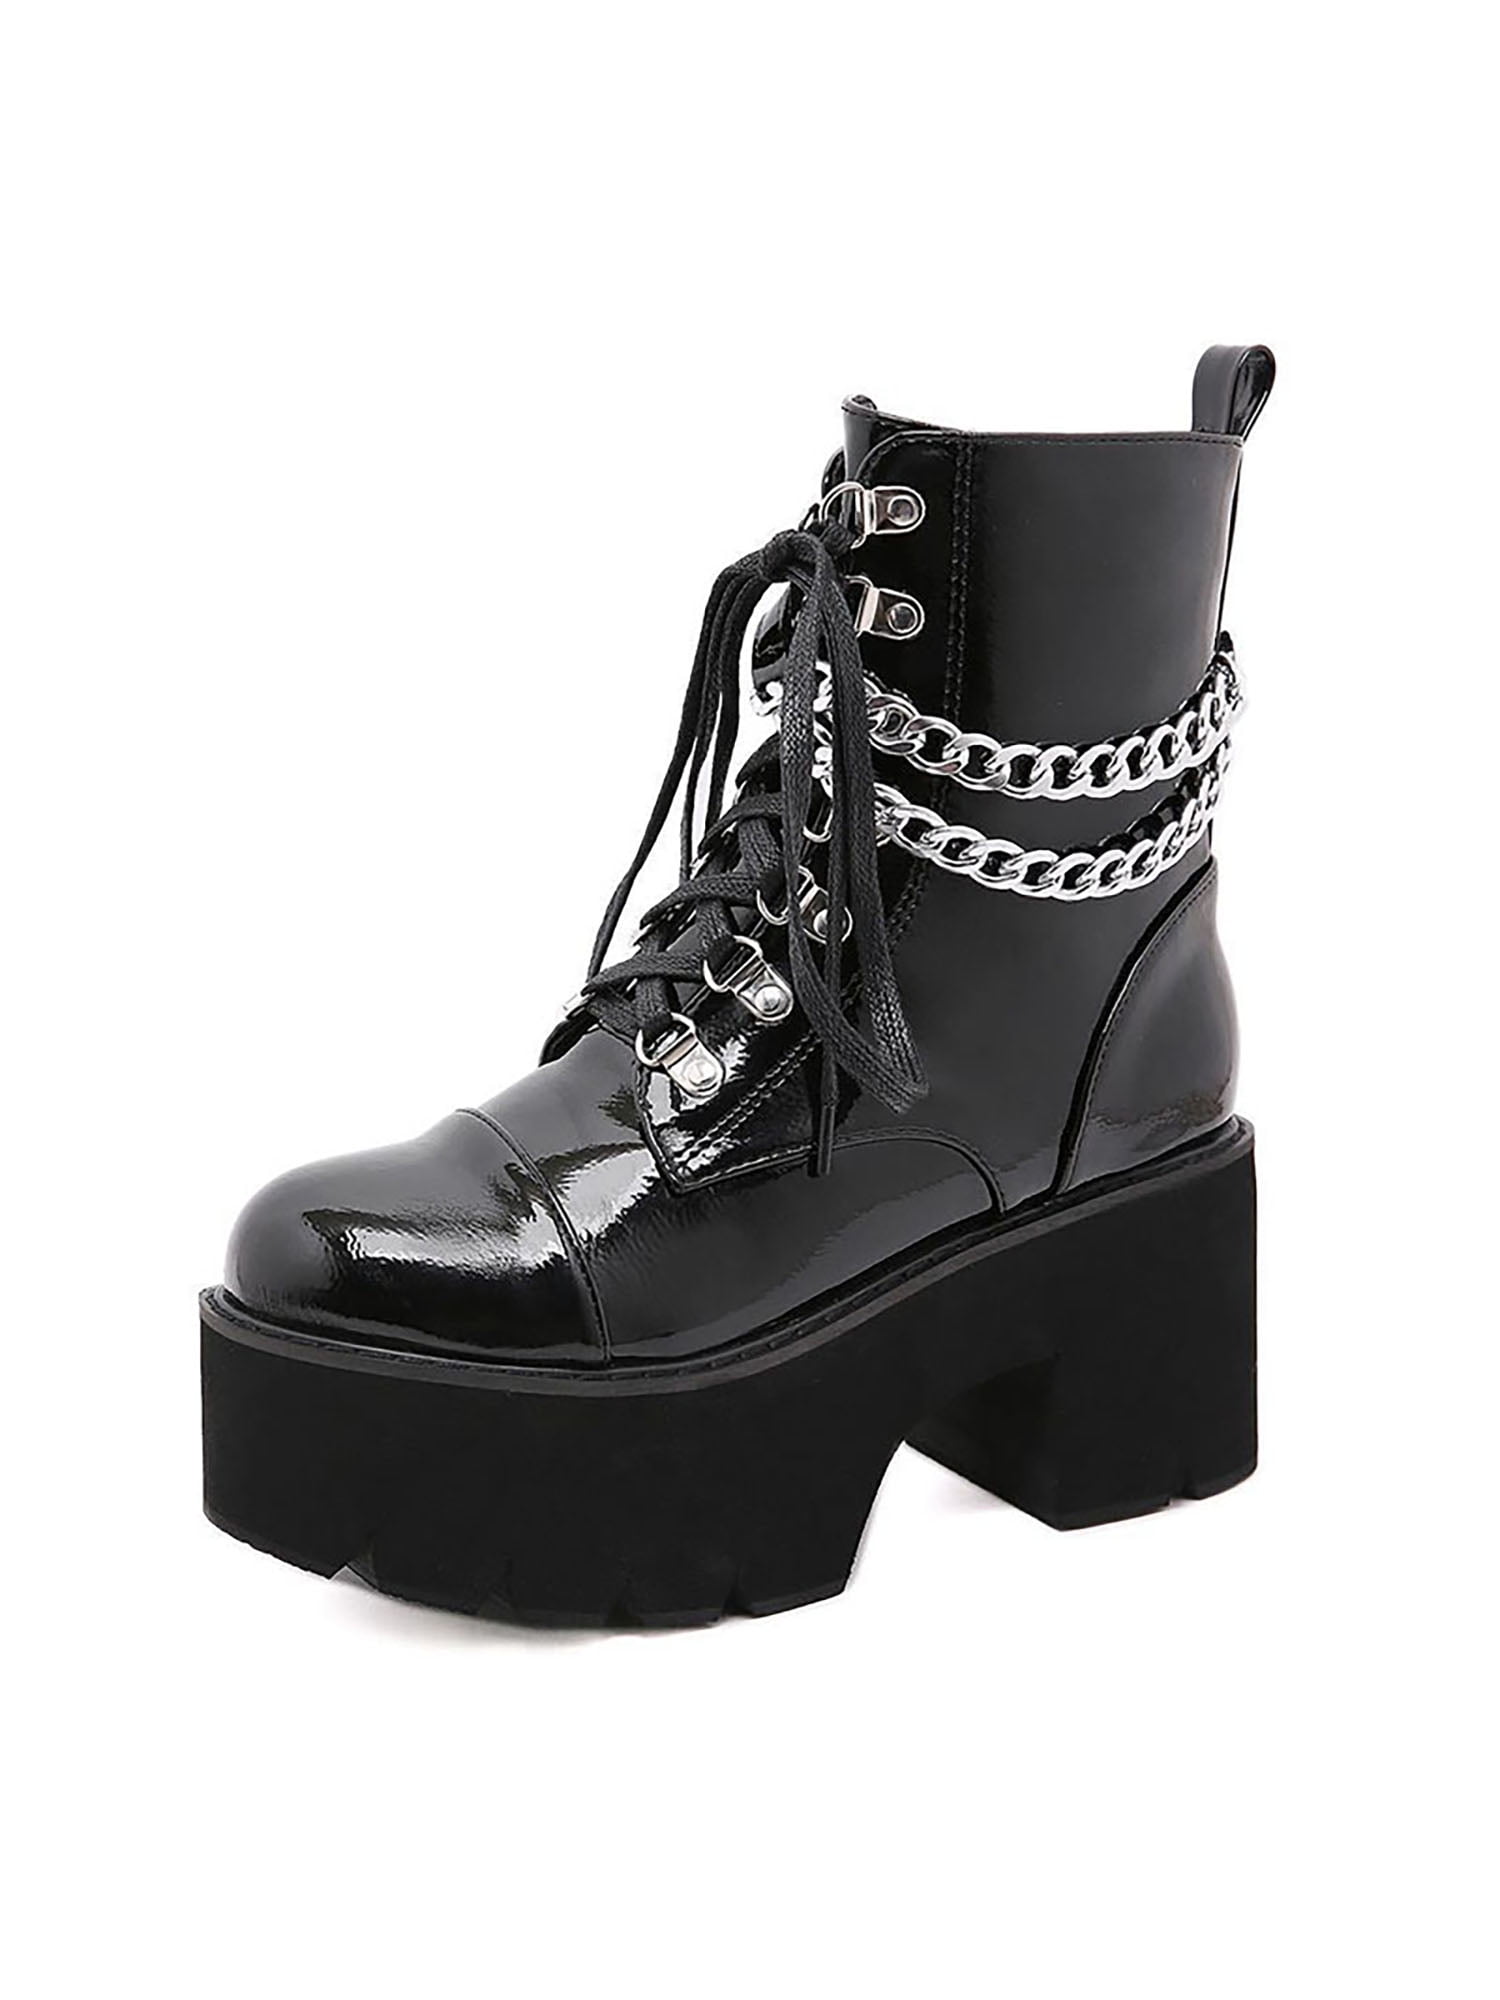 Womens Combat Gothic Round Toe Over The Knee Riding Boots Punk Lace-Up Shoes New 